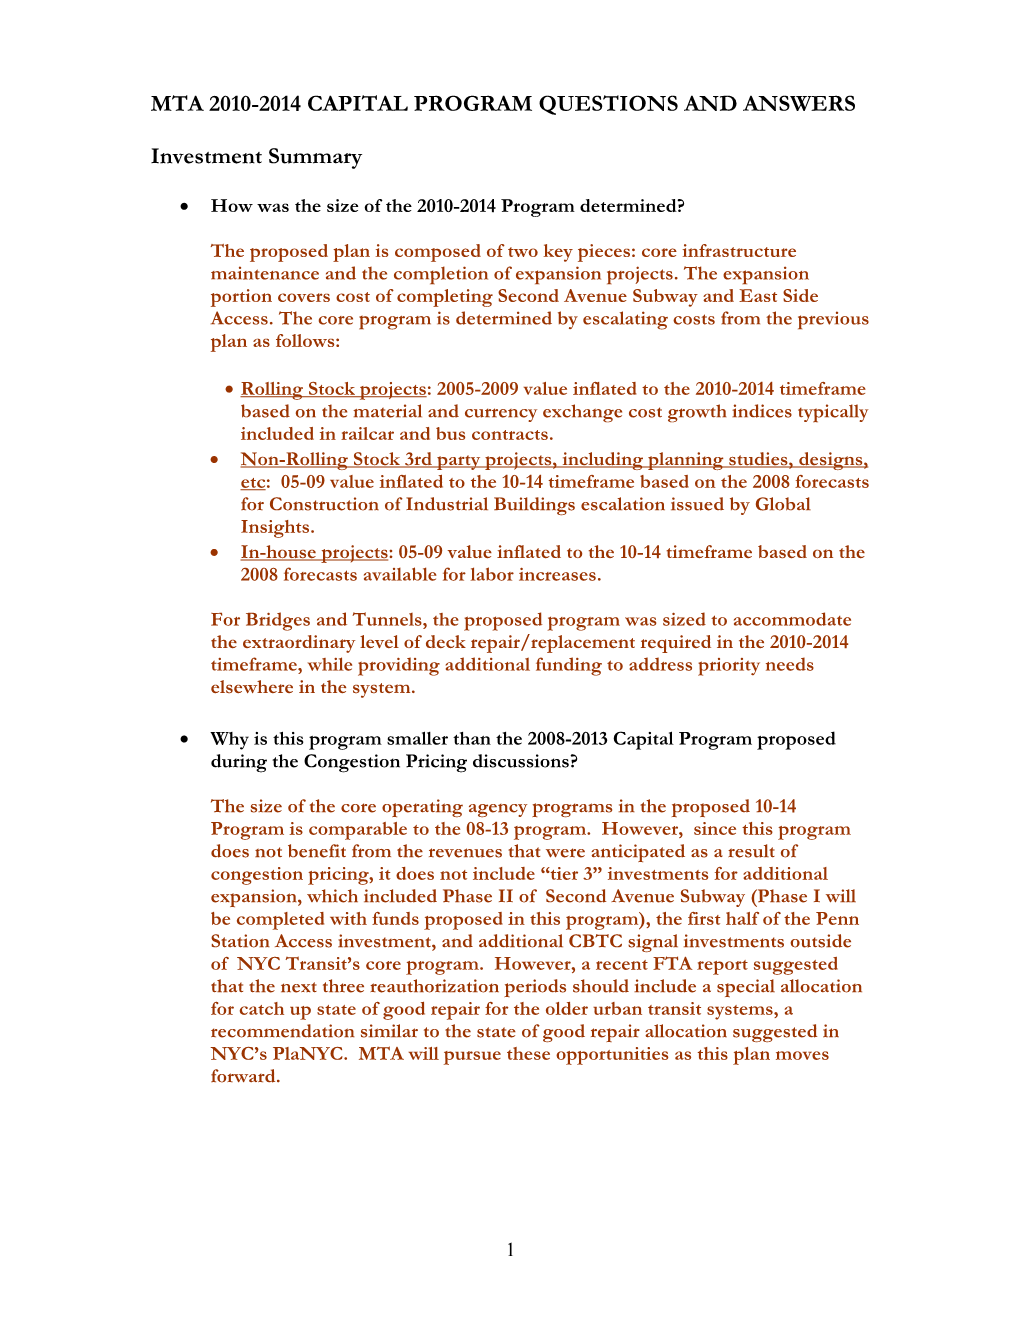 MTA 2010-2014 CAPITAL PROGRAM QUESTIONS and ANSWERS Investment Summary